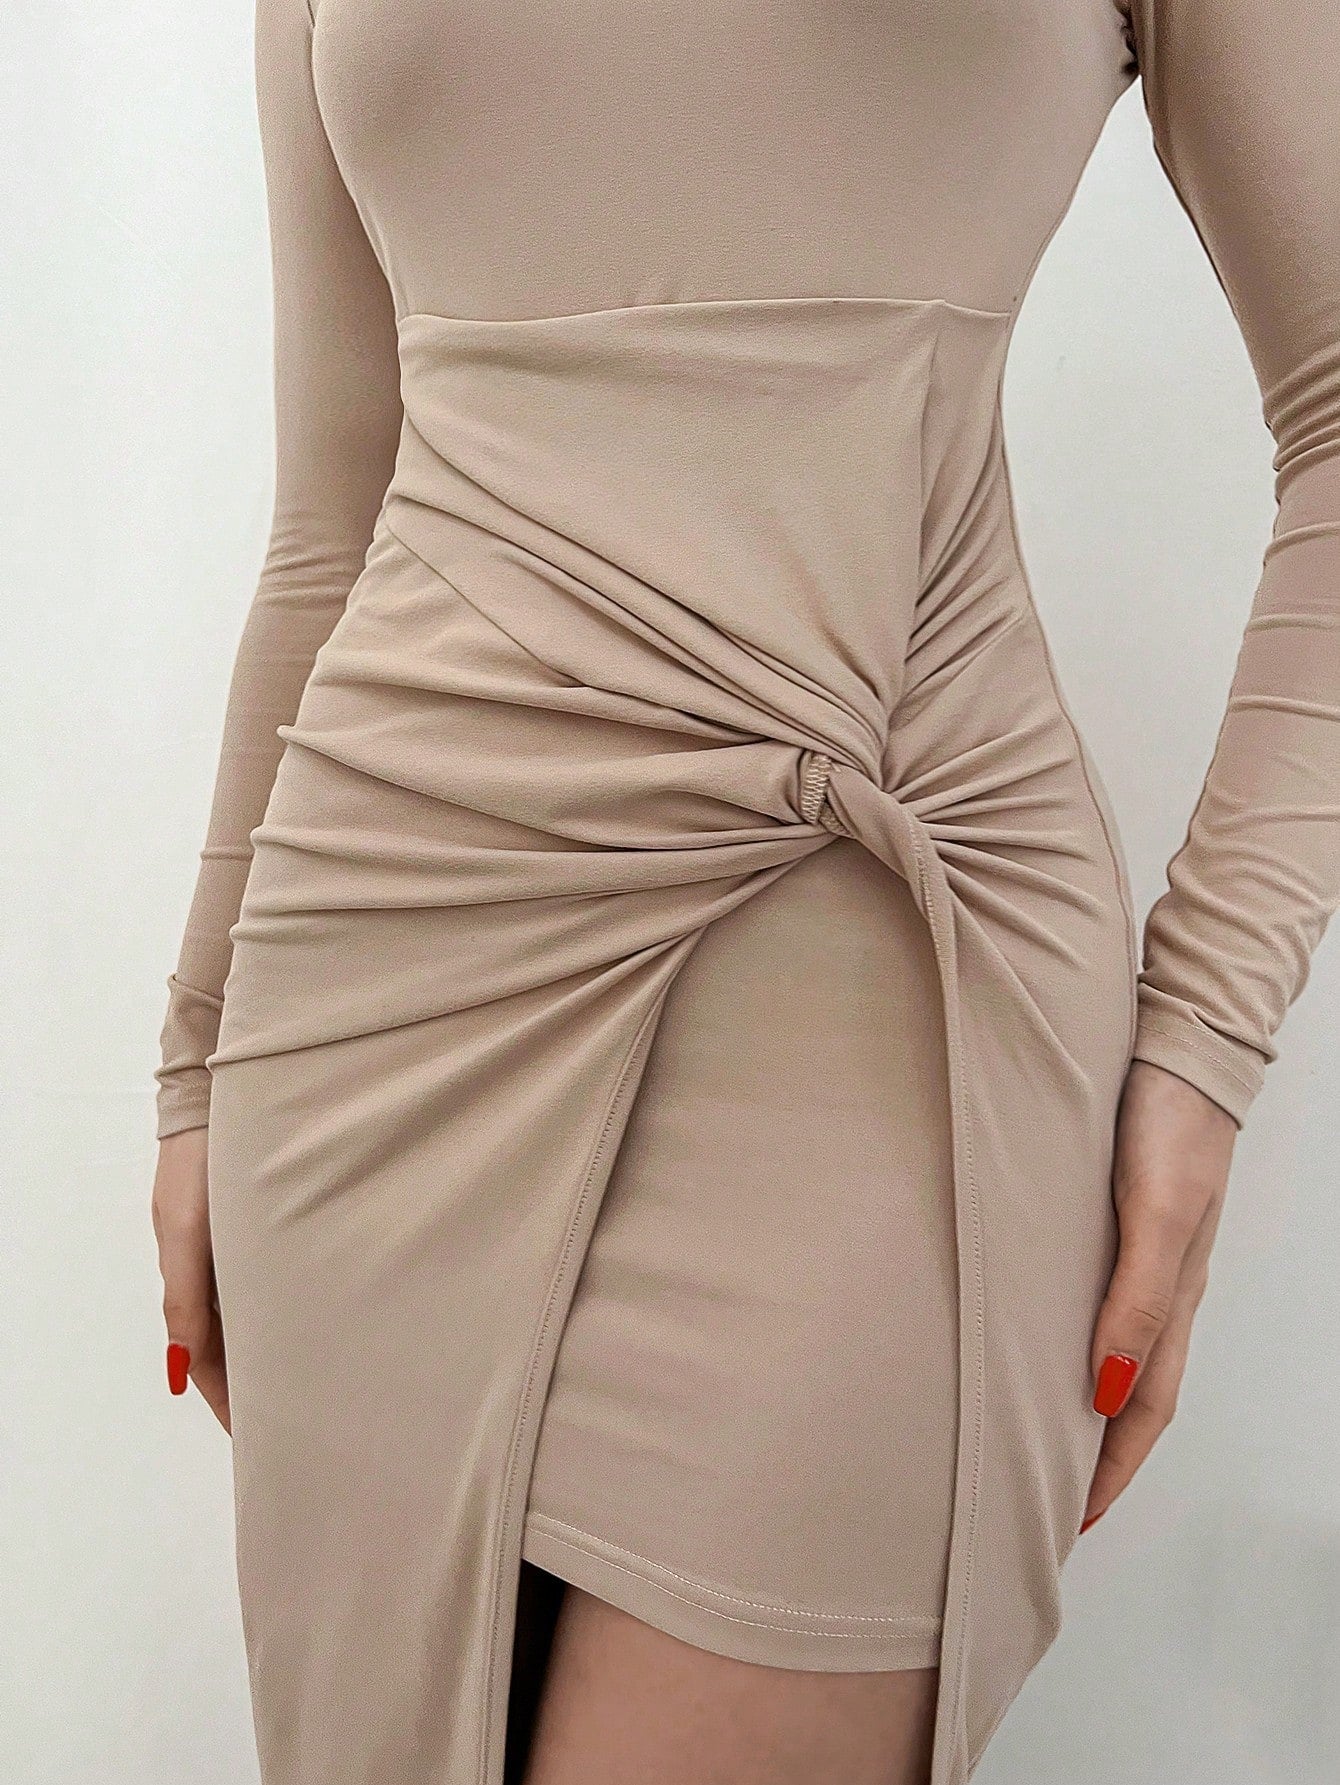 Women's Twisted Knotted High Side Slit Round Neck Bodycon Dress